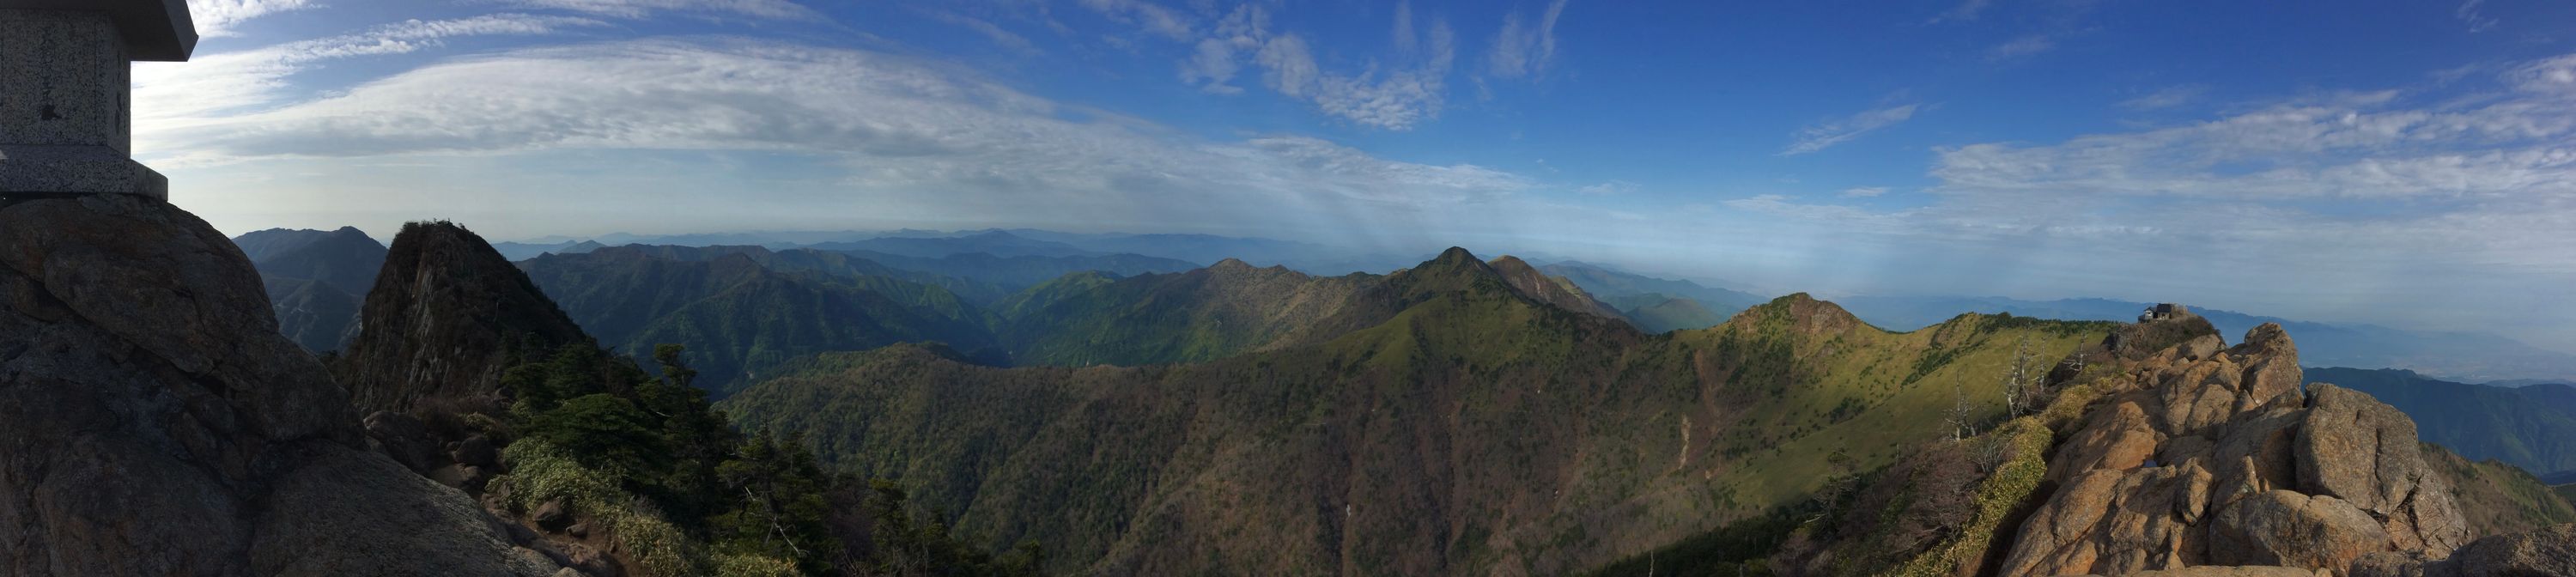 A very wide panorama of jagged mountains under a blue sky streaked with cirrus clouds, taken from the summit of Mount Ishizuchi looking north-northwest.